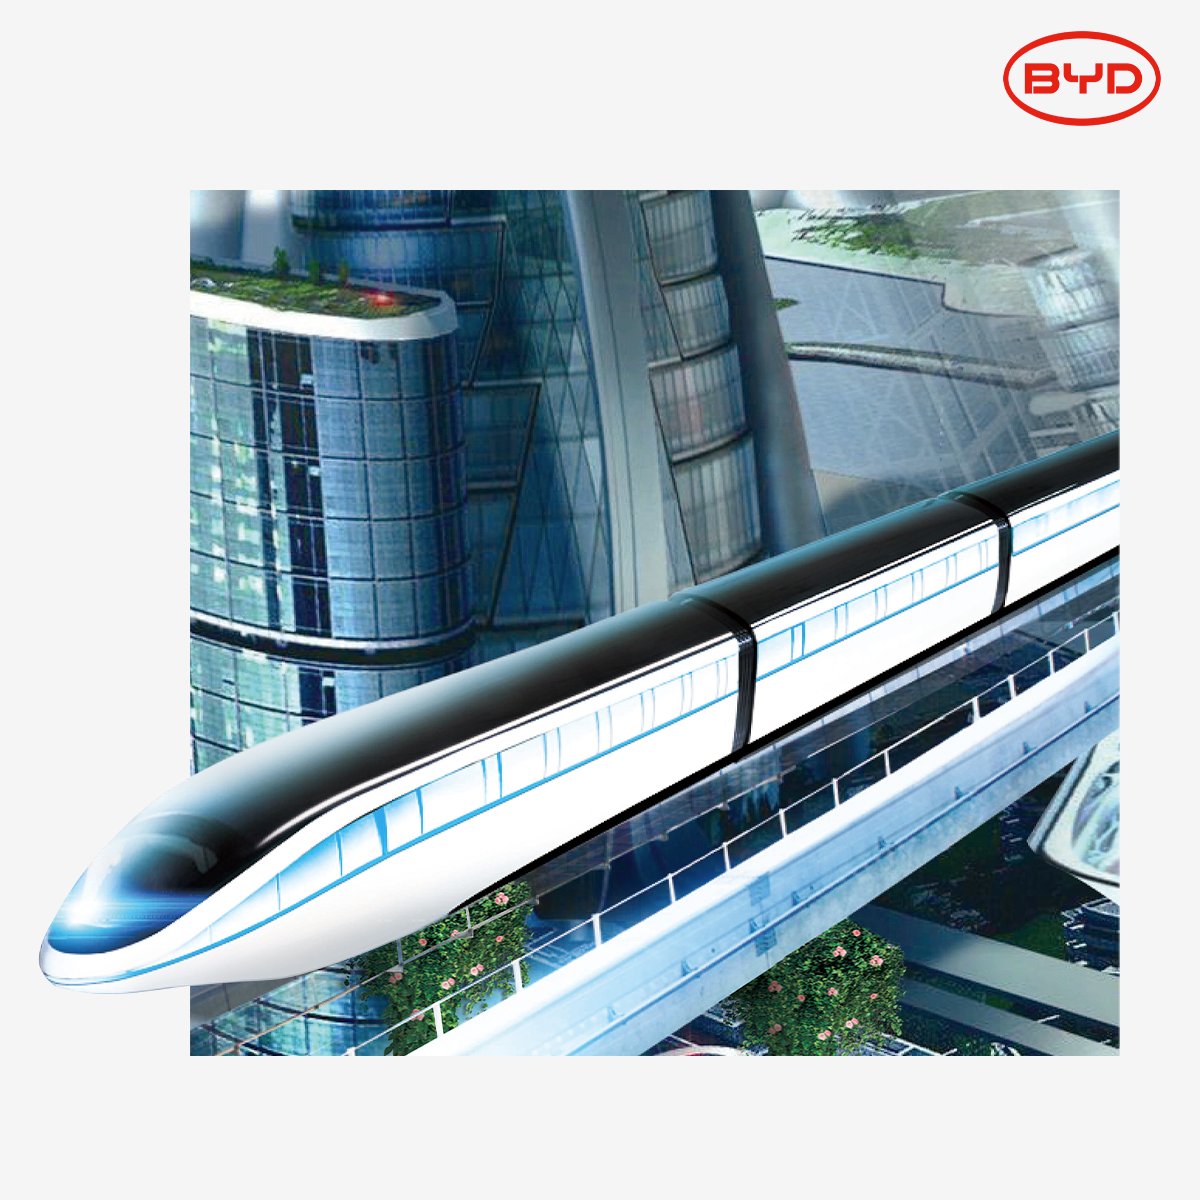 ☁️Simplify the journey, commute with ease.

#BYD #BuildYourDreams #BYDSkyRail